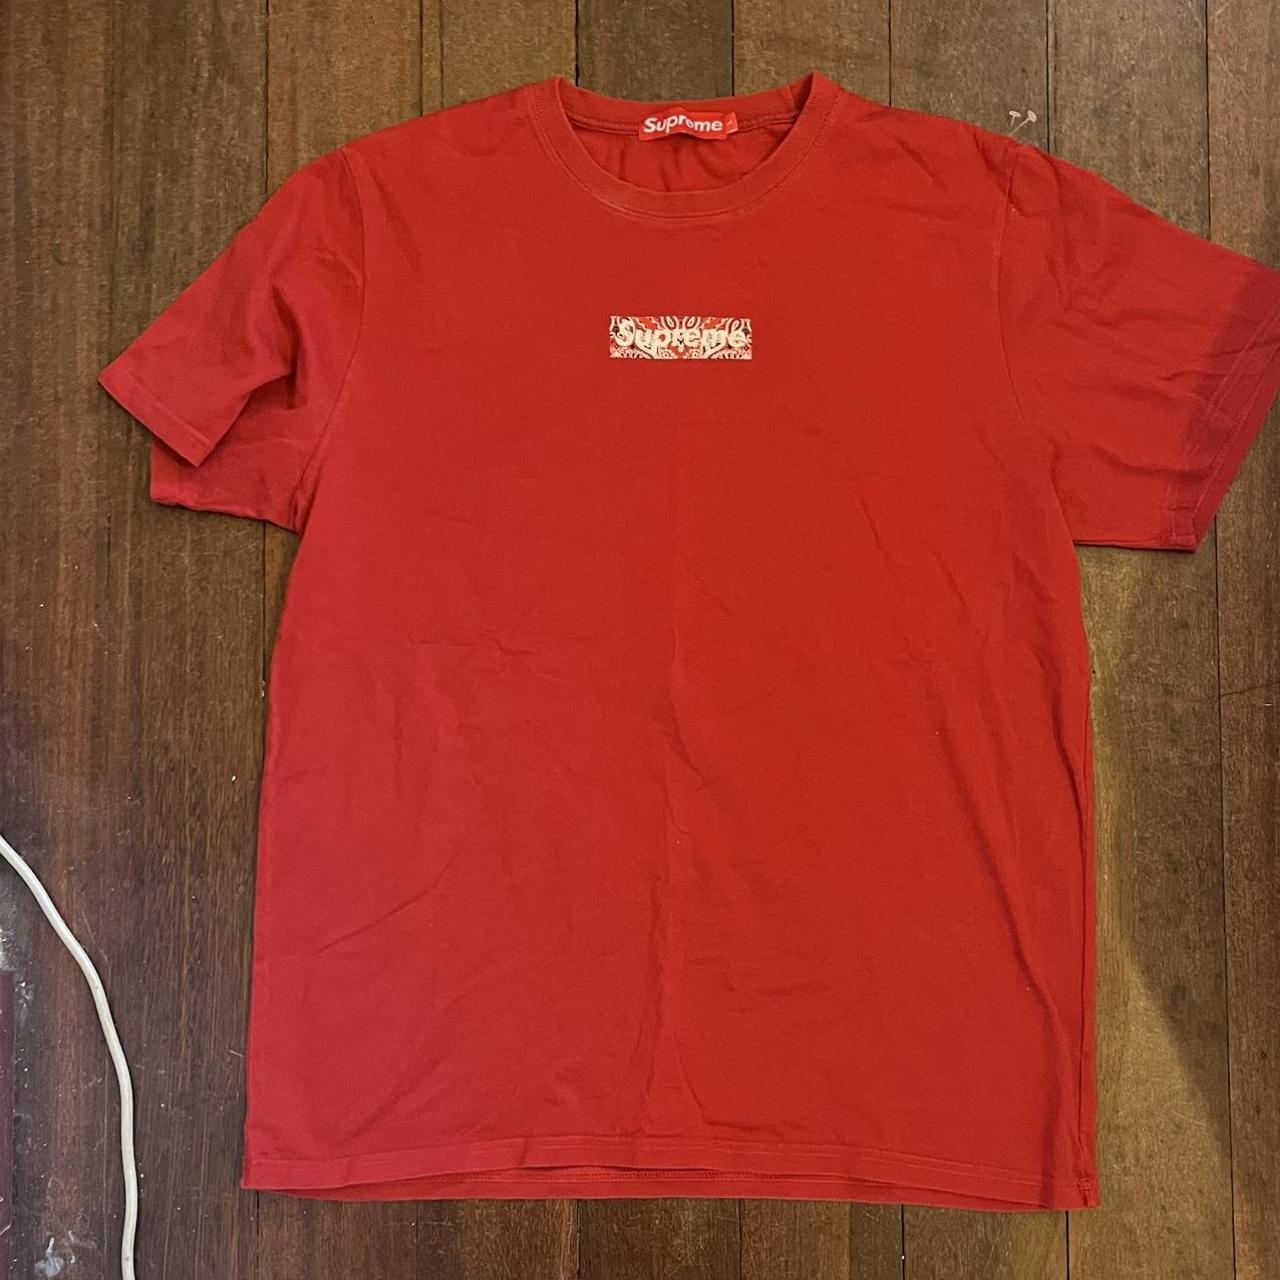 Supreme Shirt Size large Near new condition Instant... - Depop